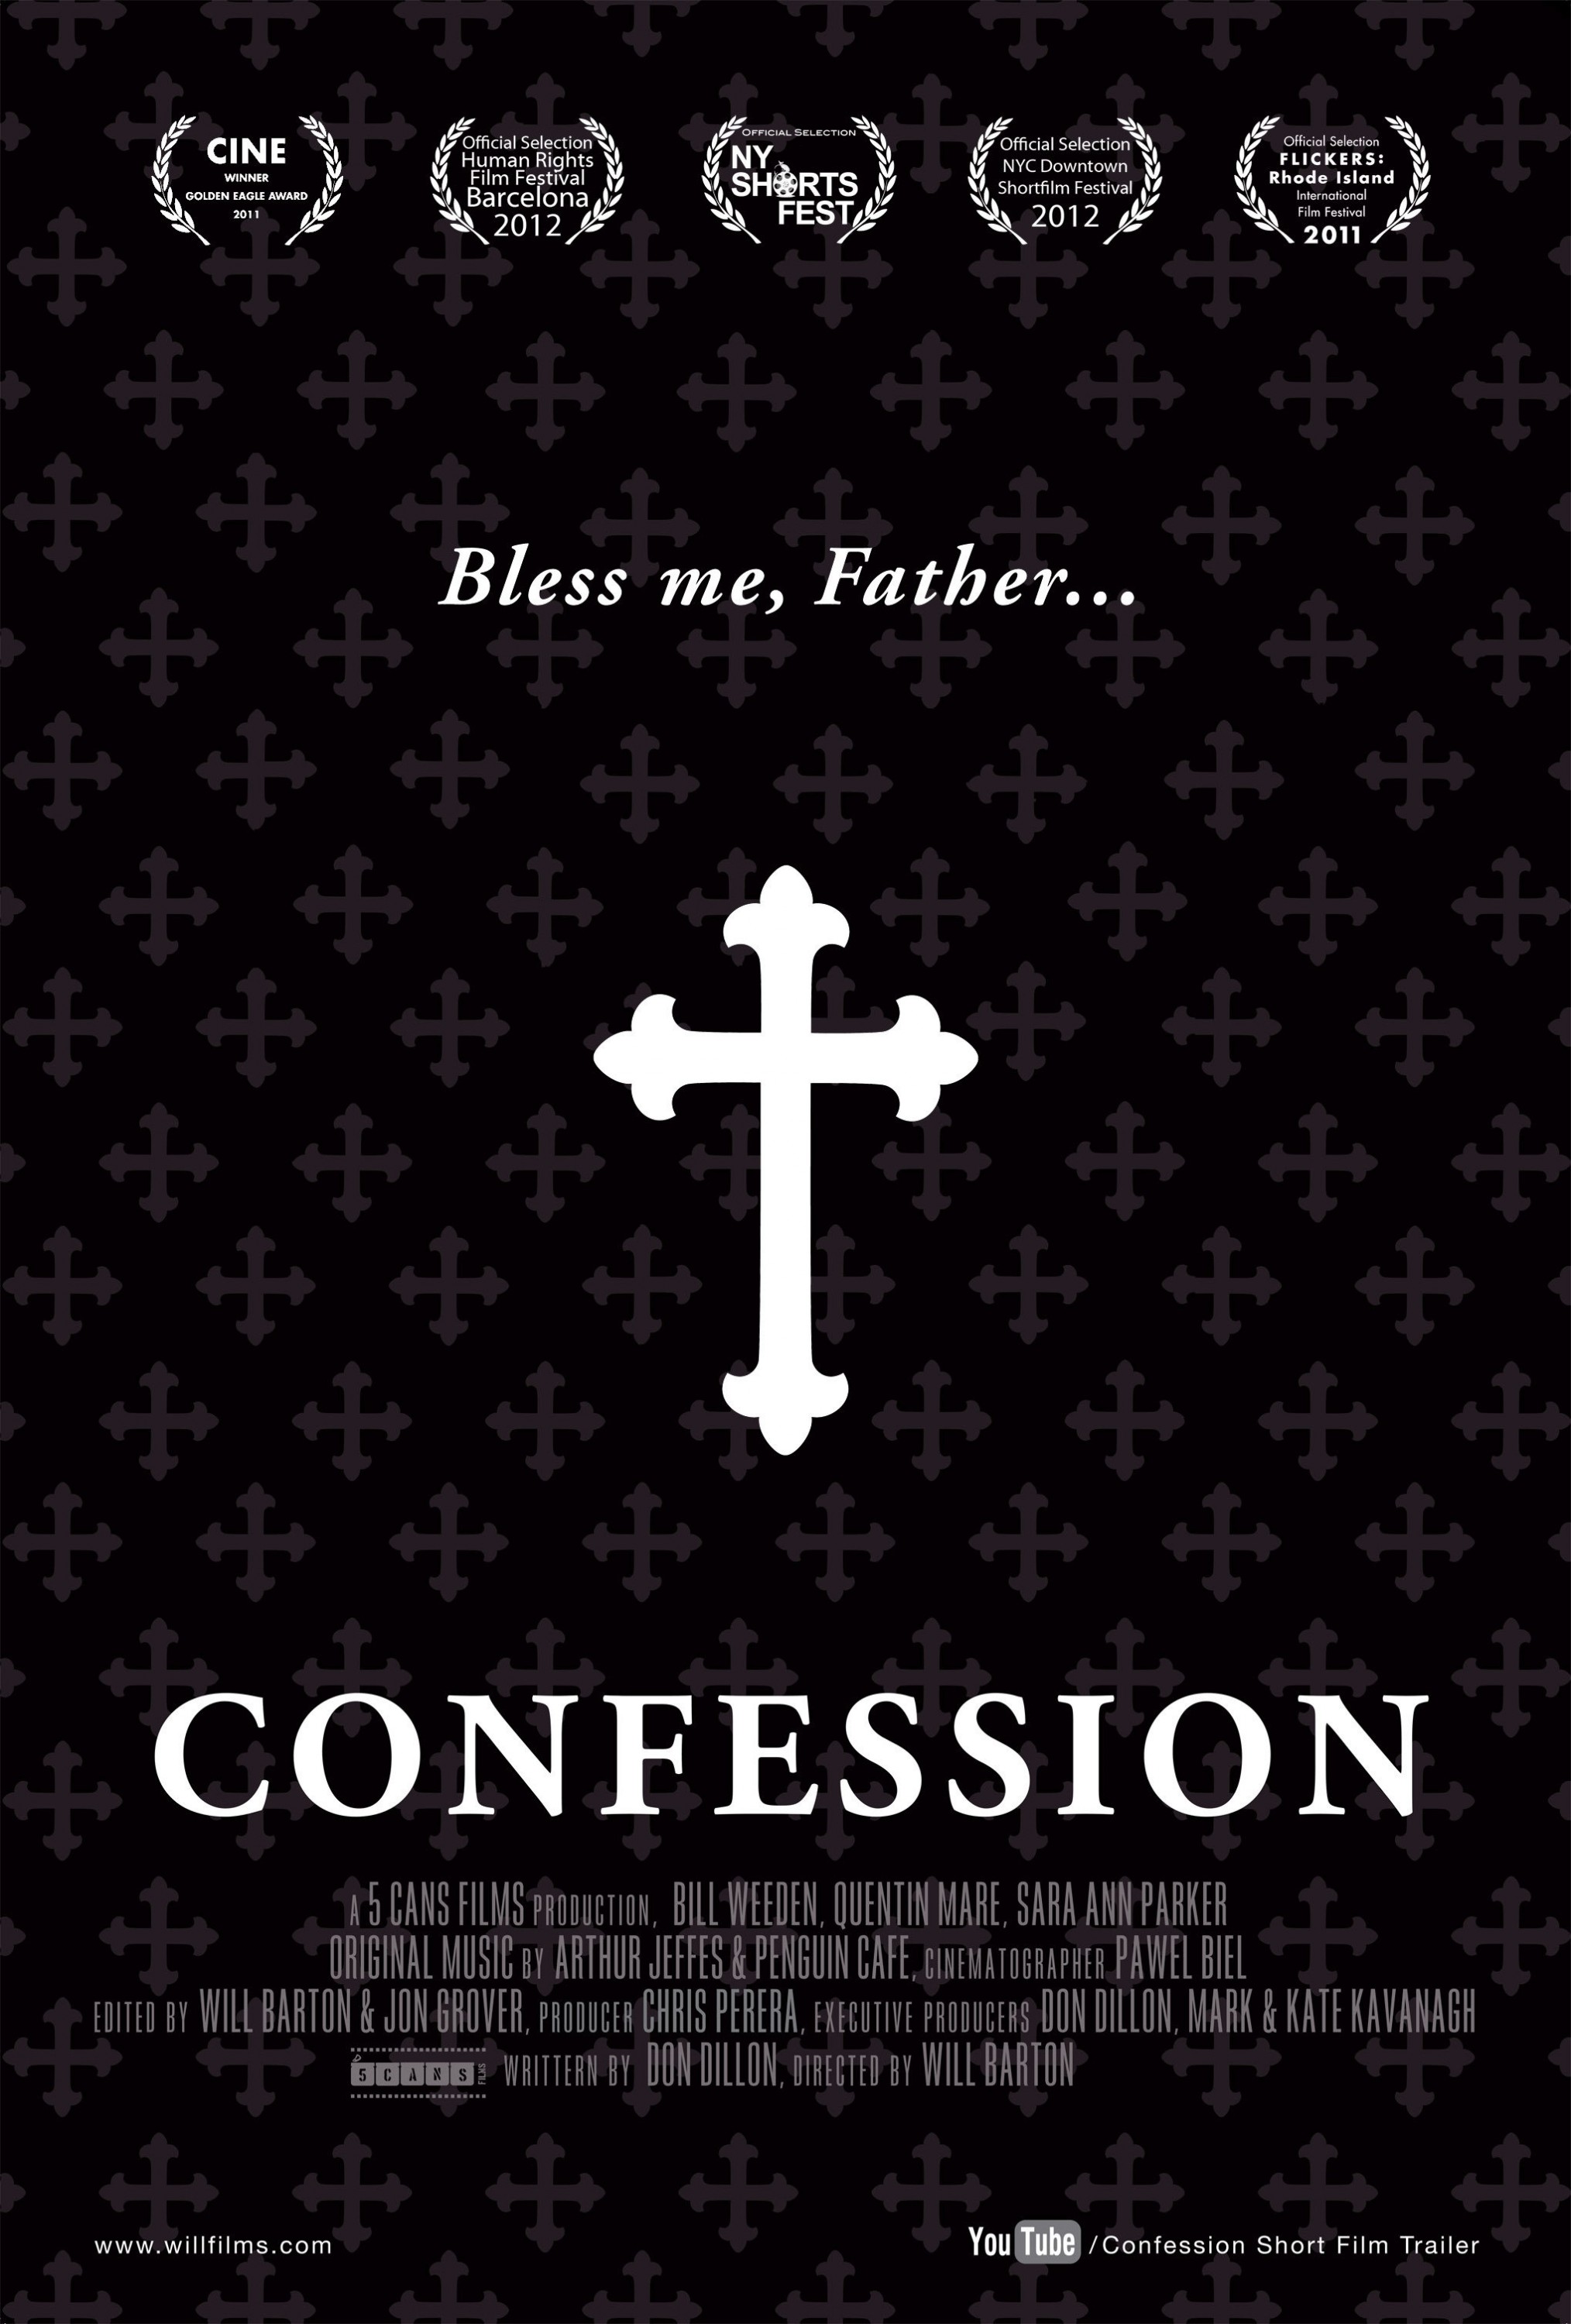 Mega Sized Movie Poster Image for Confession